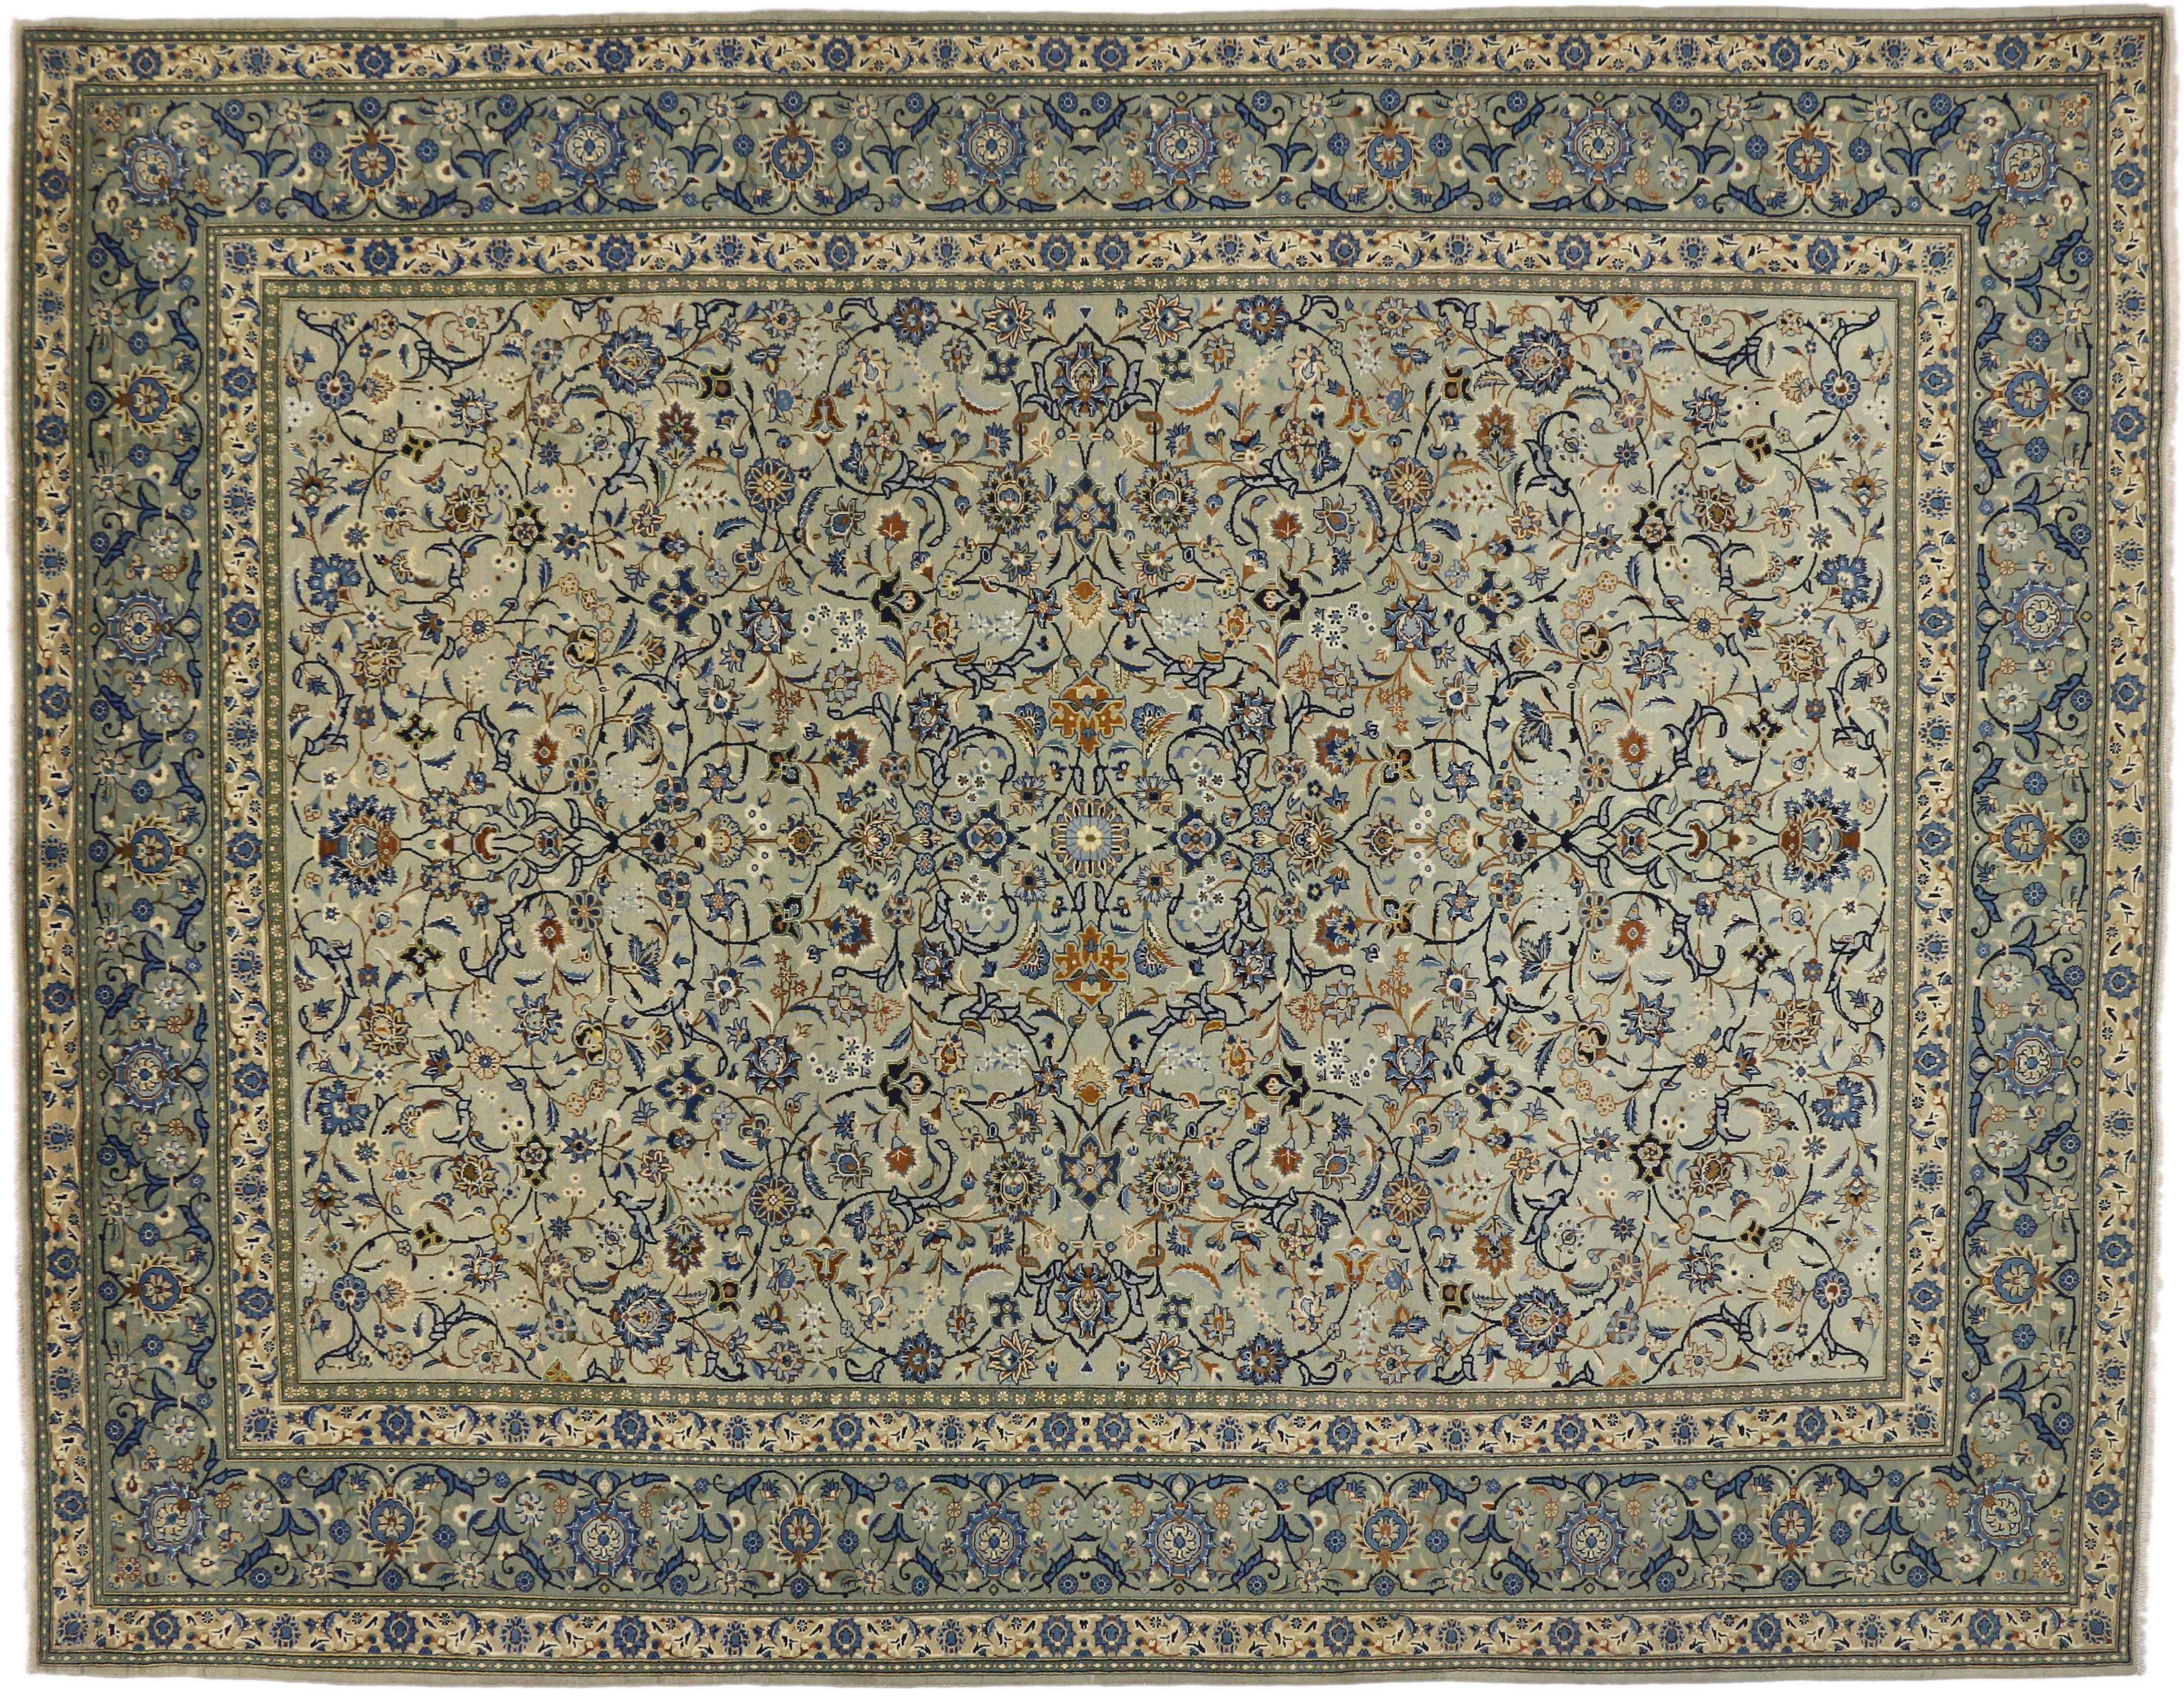 76408 Vintage Kashan Light Blue Persian Rug 09'10 x 12'07. Set off with stylish levels of complexity and its highly decorative aesthetic, this hand-knotted wool vintage Kashan light blue Persian rug features an all-over floral pattern with